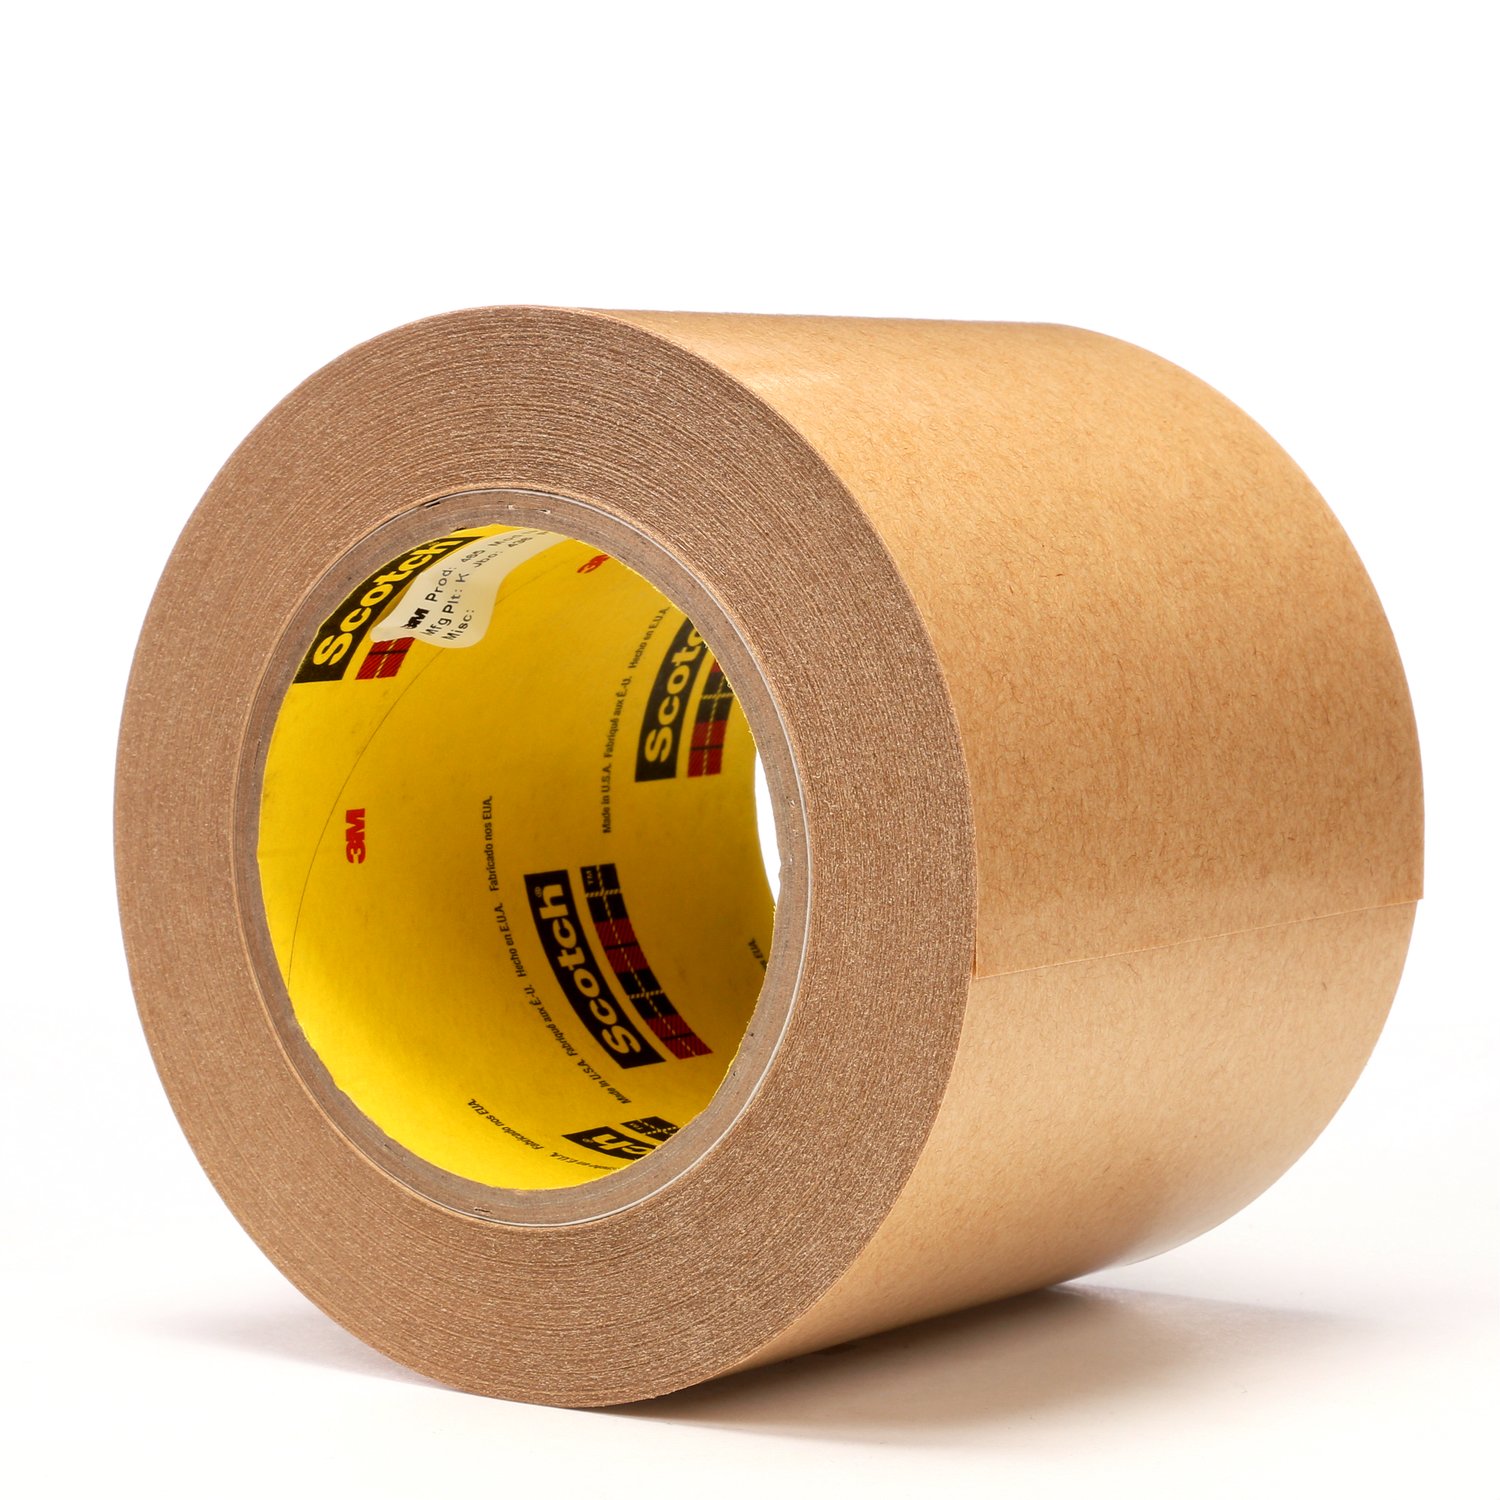 7000122482 - 3M Adhesive Transfer Tape 465, Clear, 4 in x 60 yd, 2 mil, 8 rolls per
case